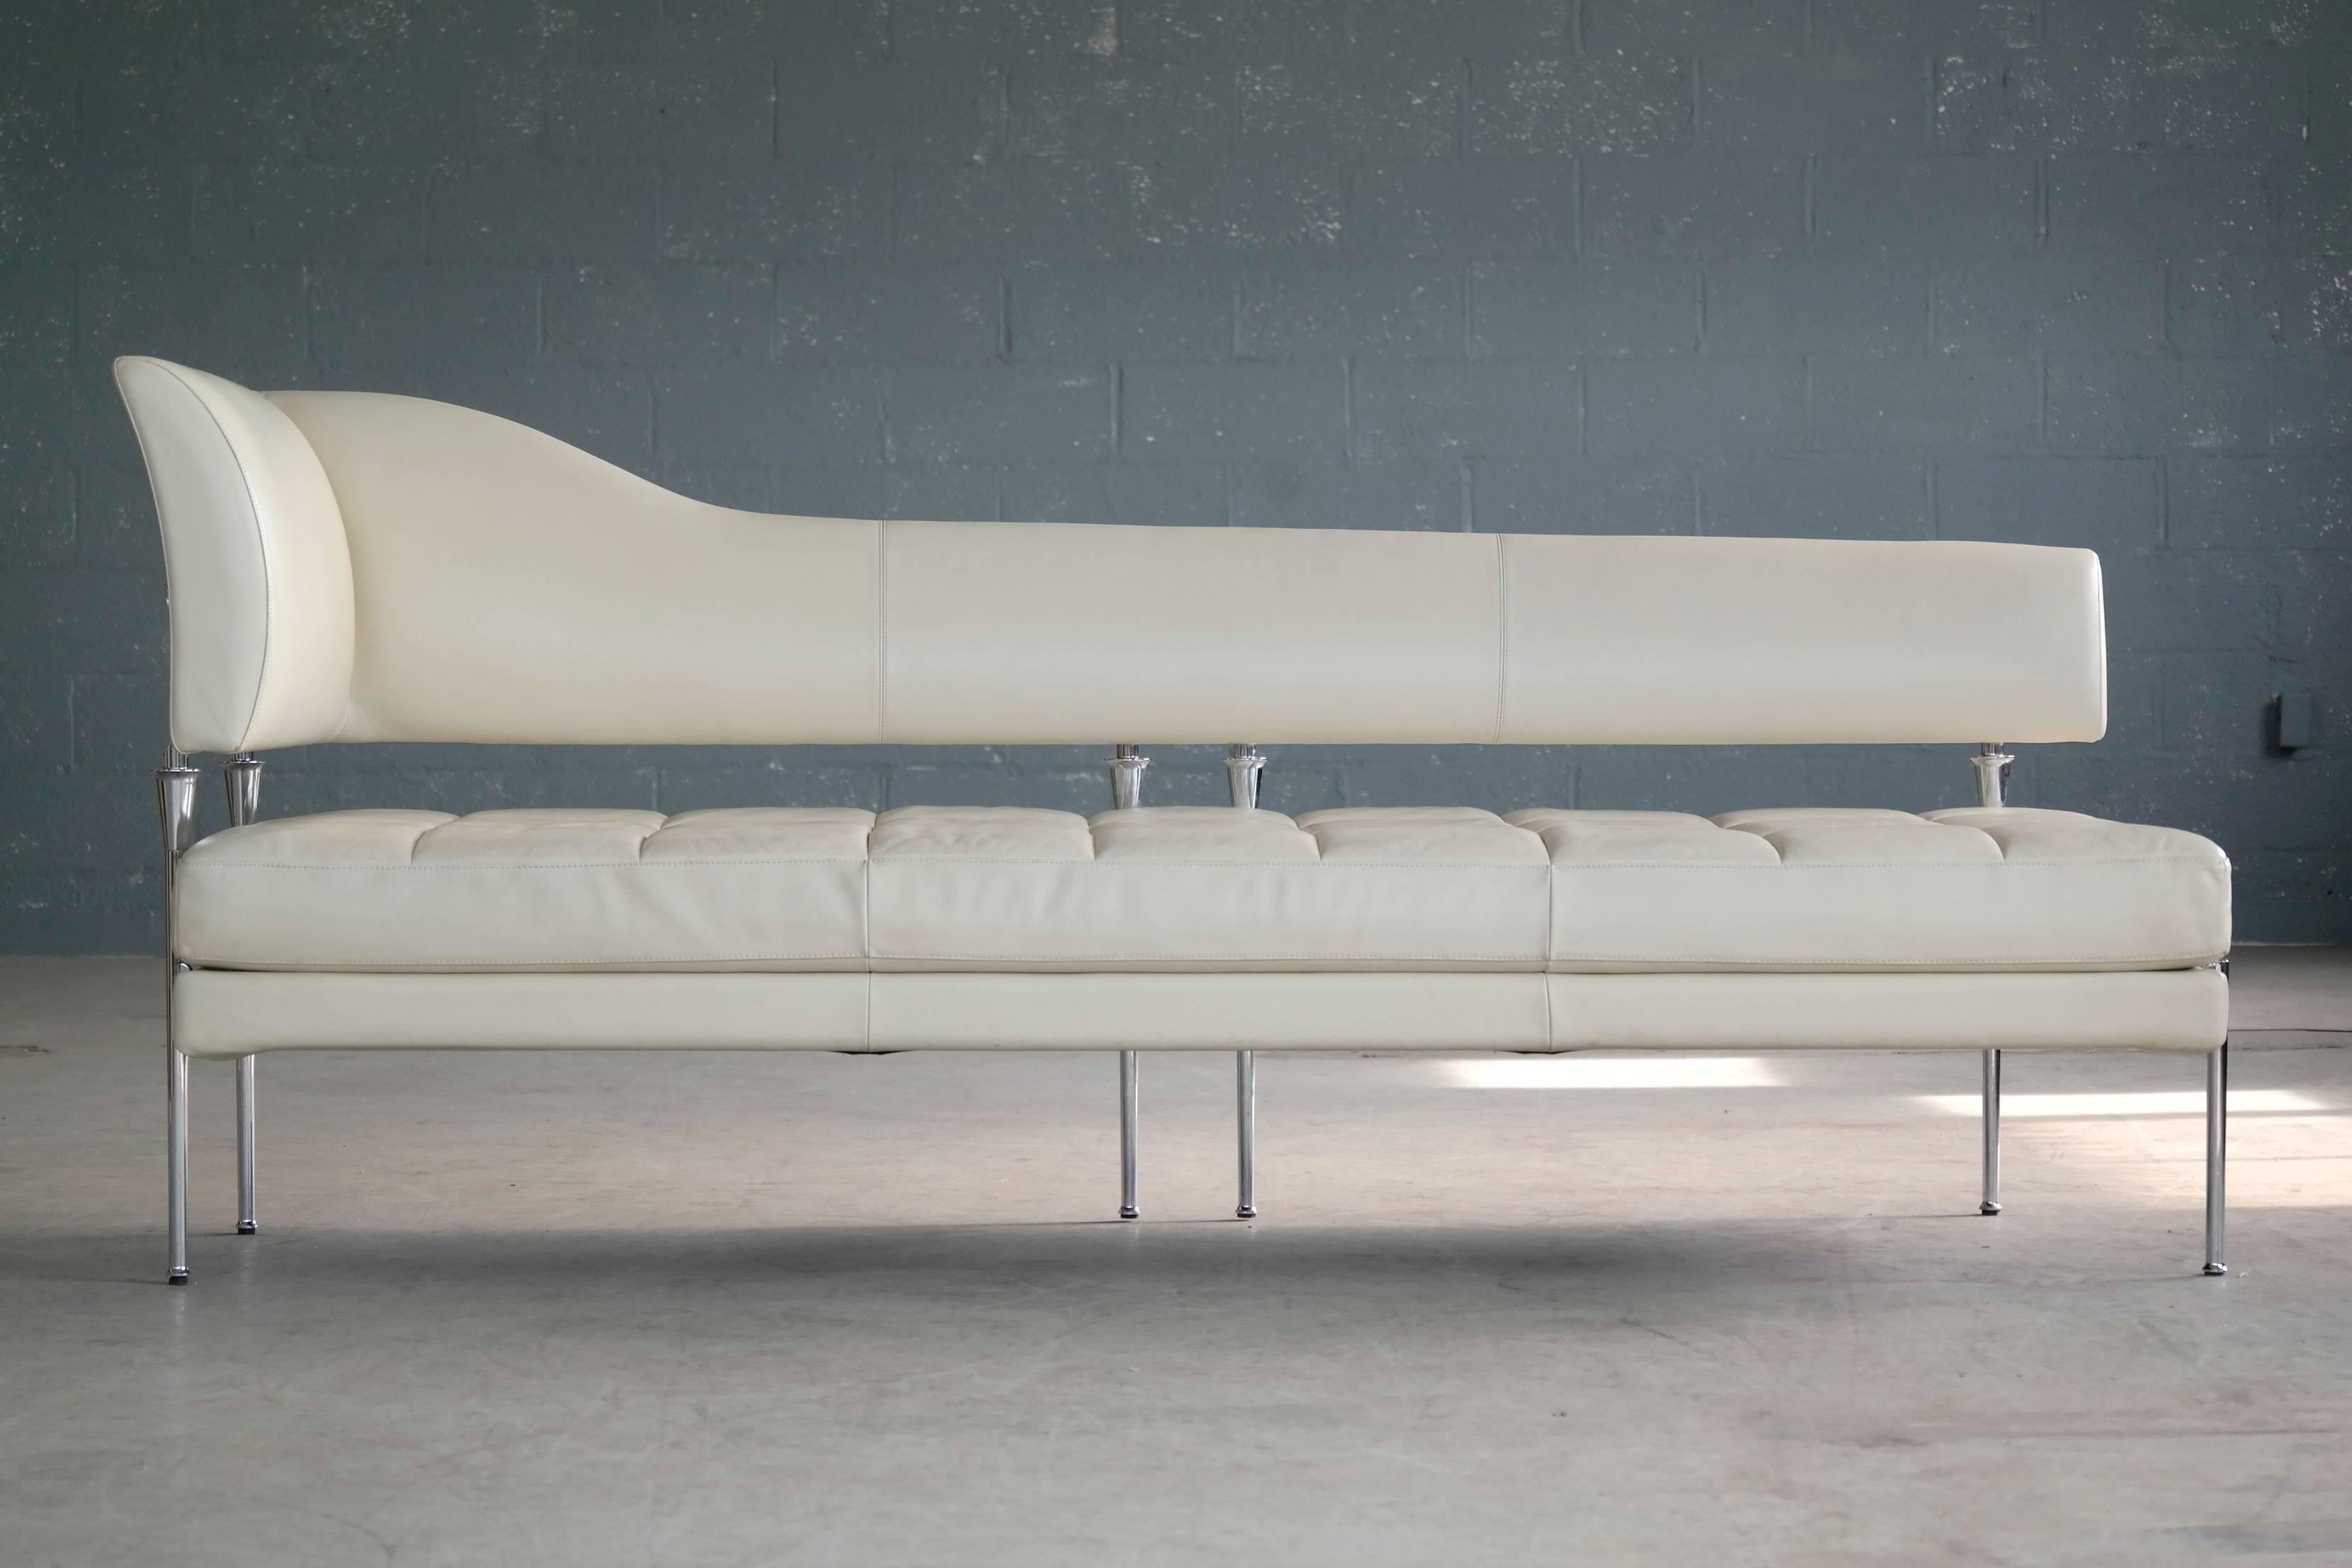 Superb design and unparalleled craftsmanship expressed in this modern Luca Scacchetti model Hydra chaise longue designed in 1992 for Poltrona Frau, Italy. Poltrona Frau pieces are the epitome of contemporary European furniture design, are of